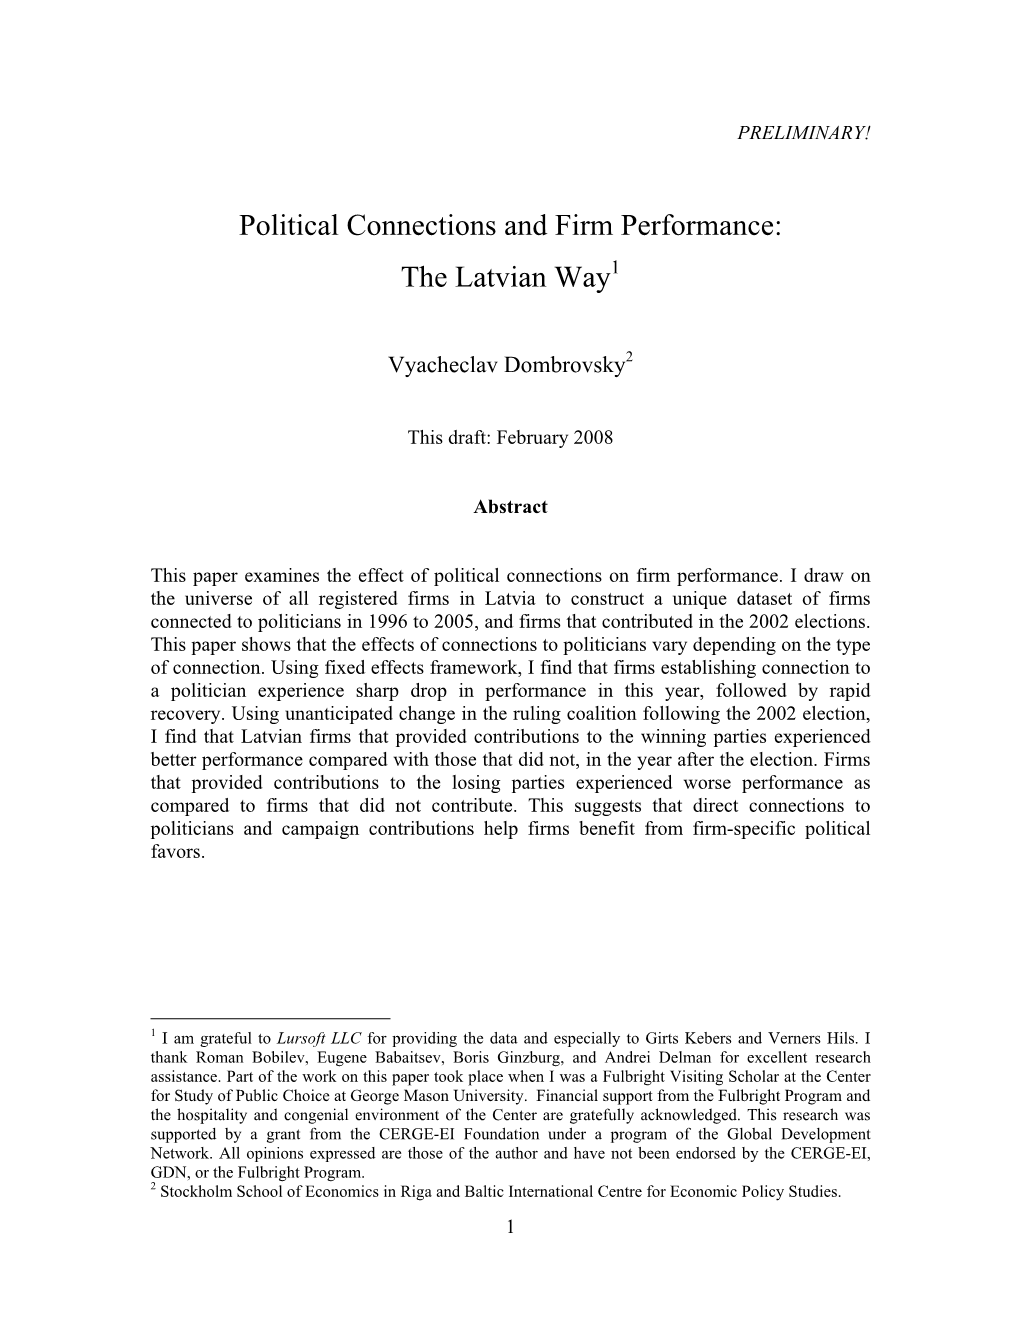 Political Connections and Firm Performance: the Latvian Way1